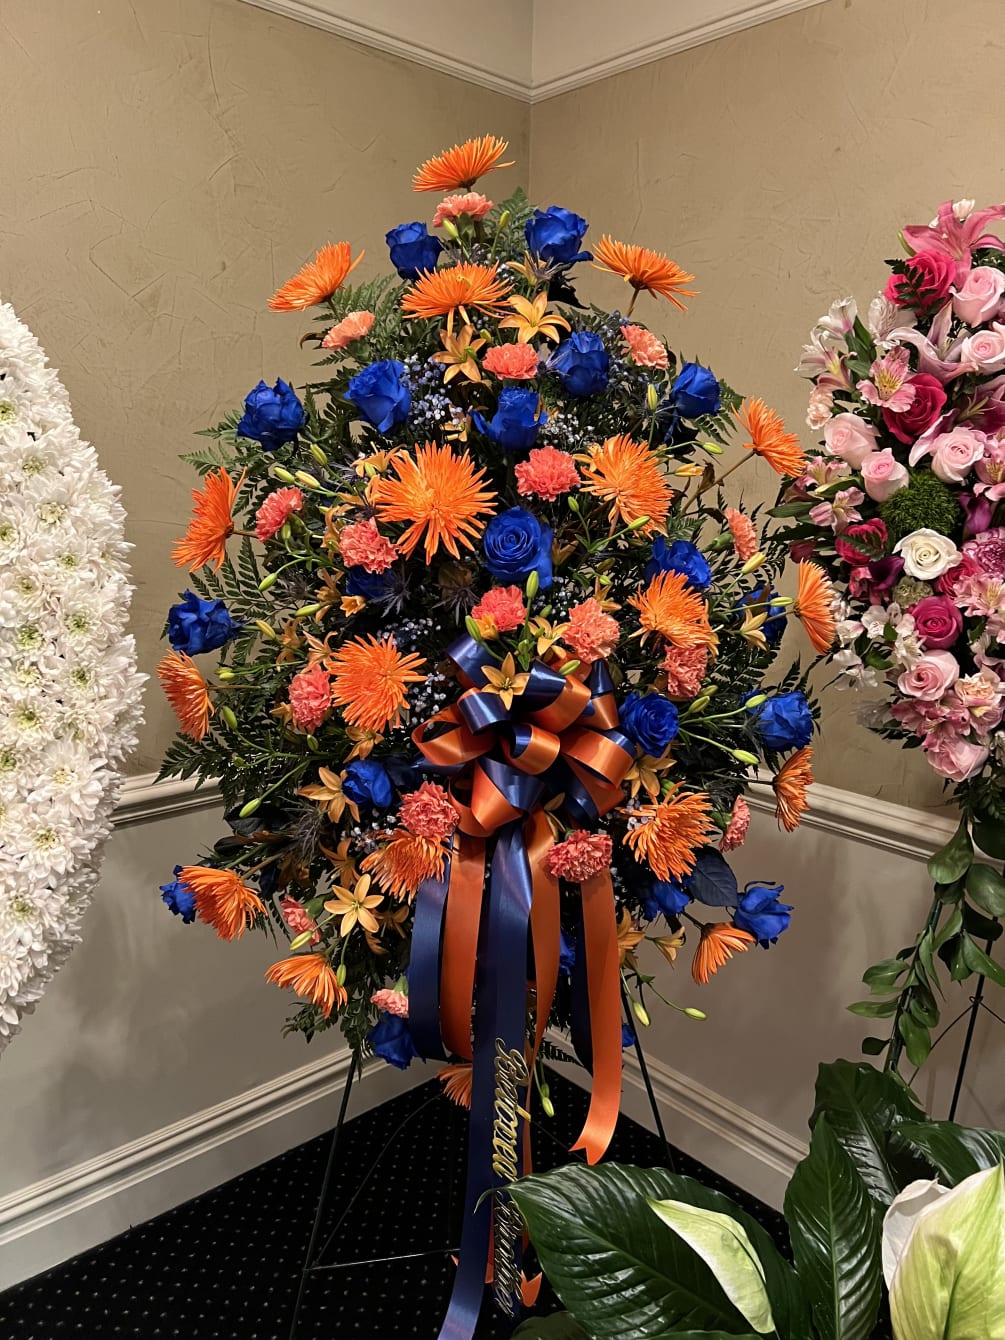 Mixed assortment of orange and blue flowers